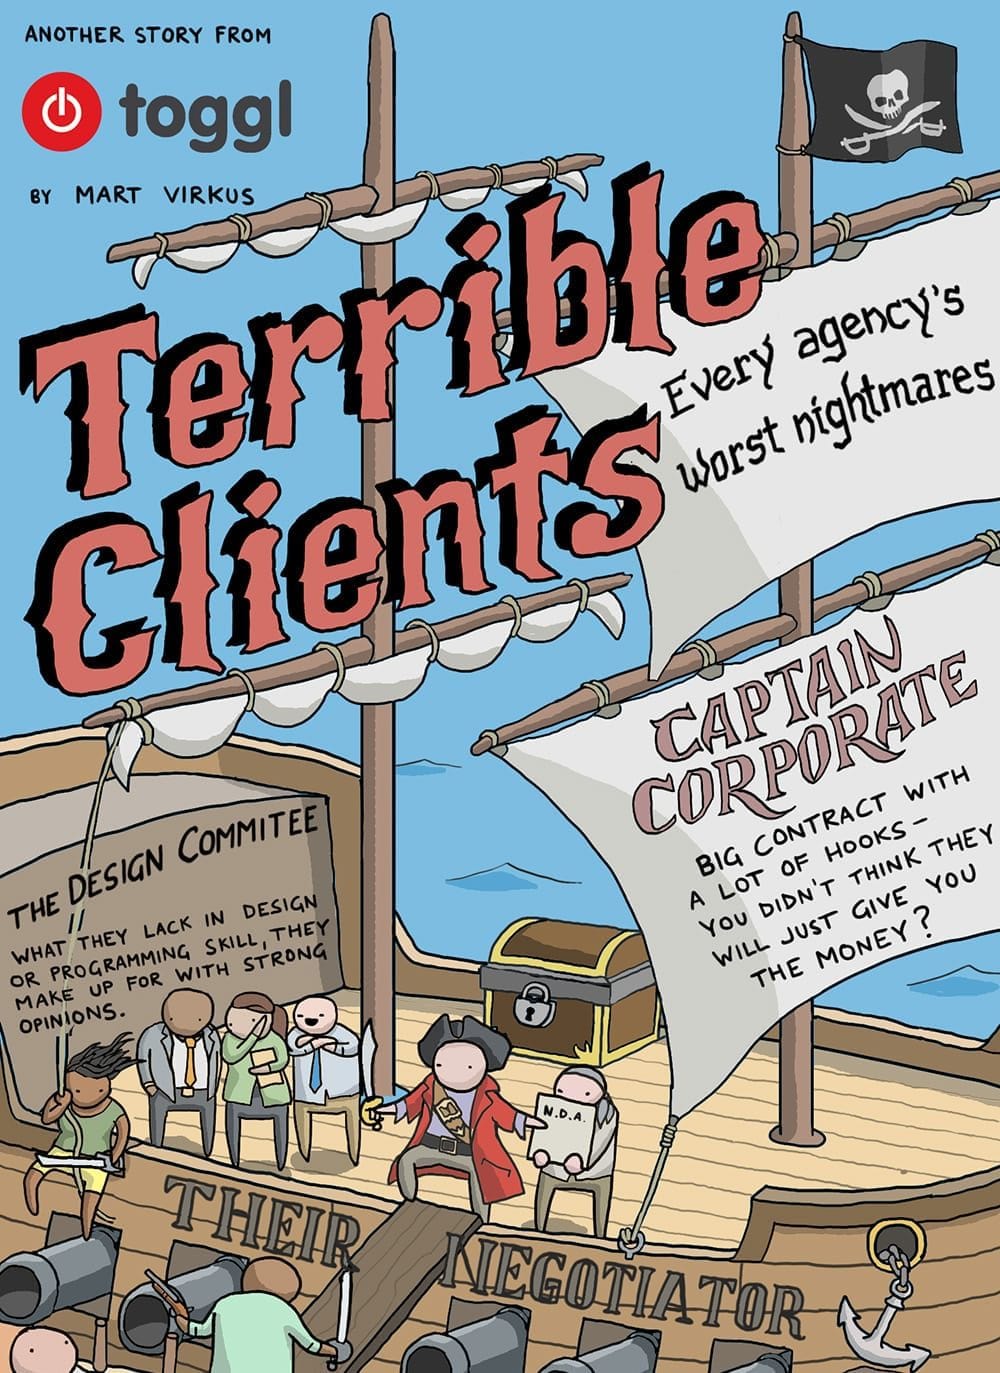 terrible-clients-explained-with-pirates-toggl-infographic-mart-virkus